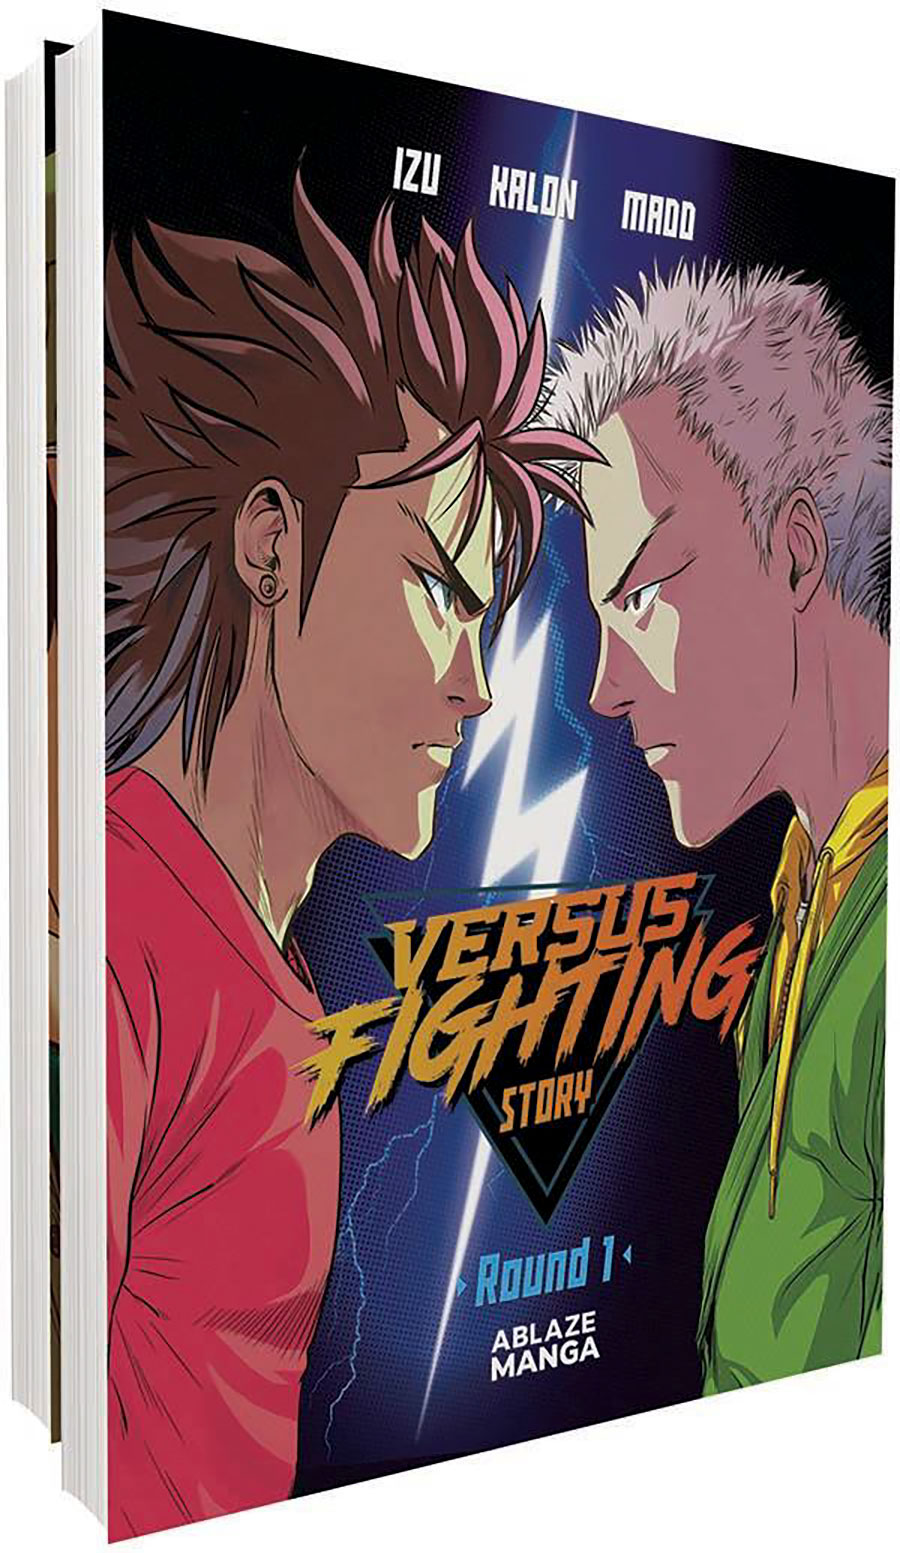 Versus Fighting Story Vol 1-2 GN Collected Set